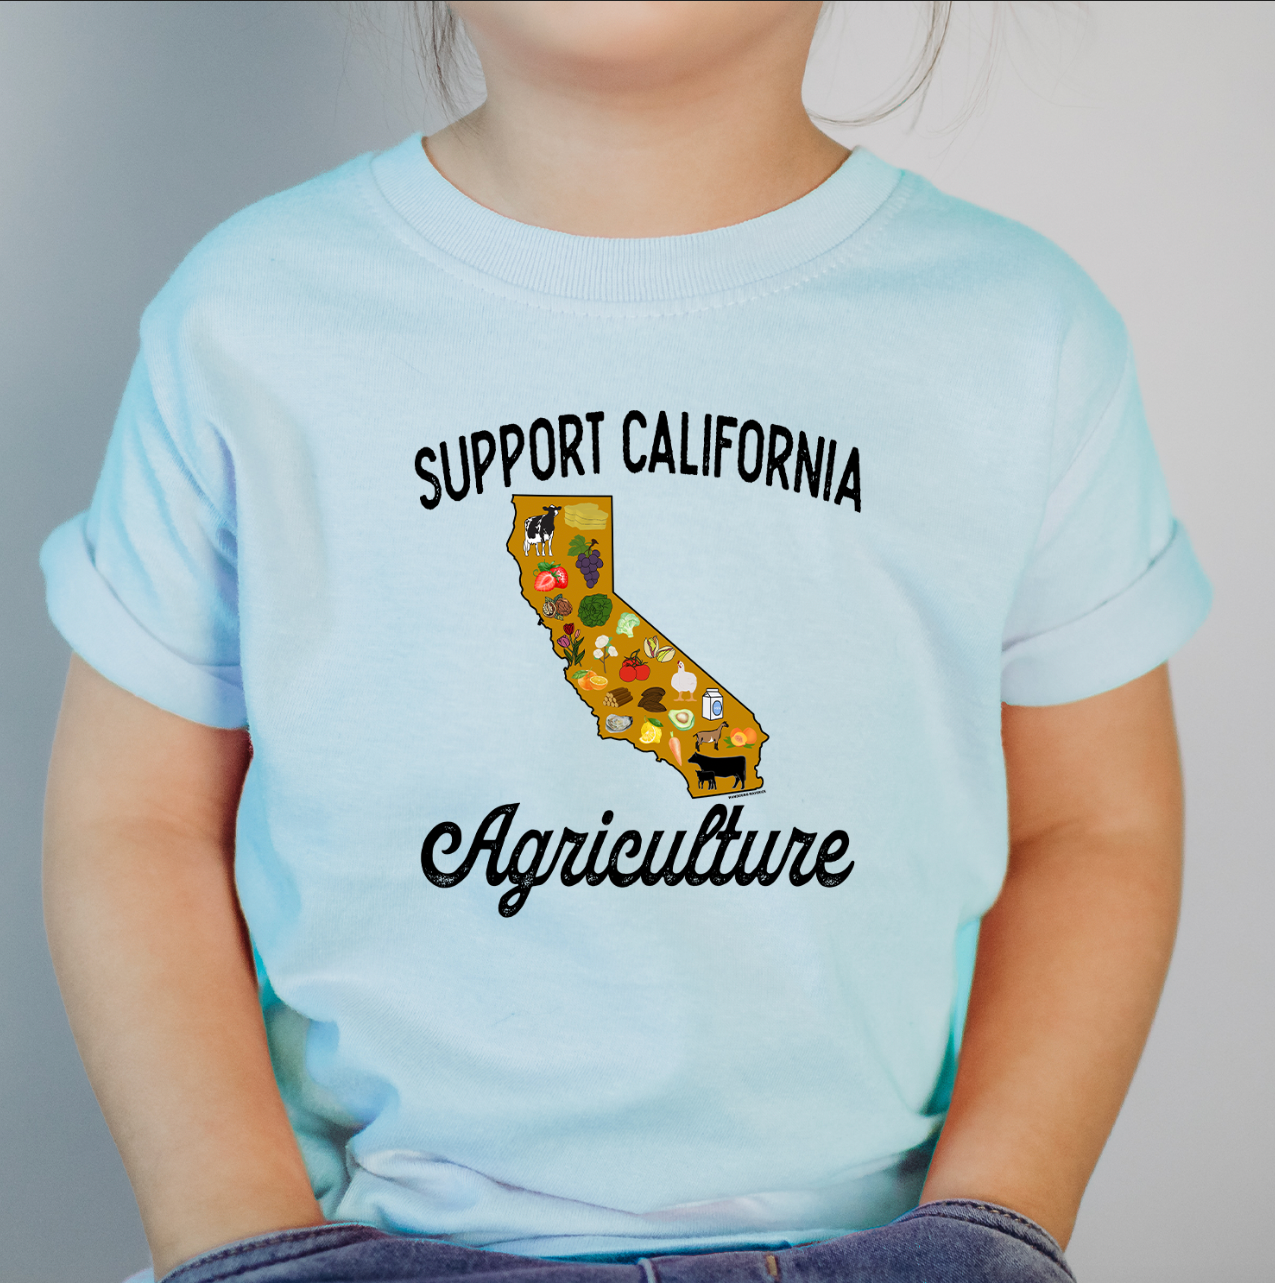 Support California Agriculture One Piece/T-Shirt (Newborn - Youth XL) - Multiple Colors!